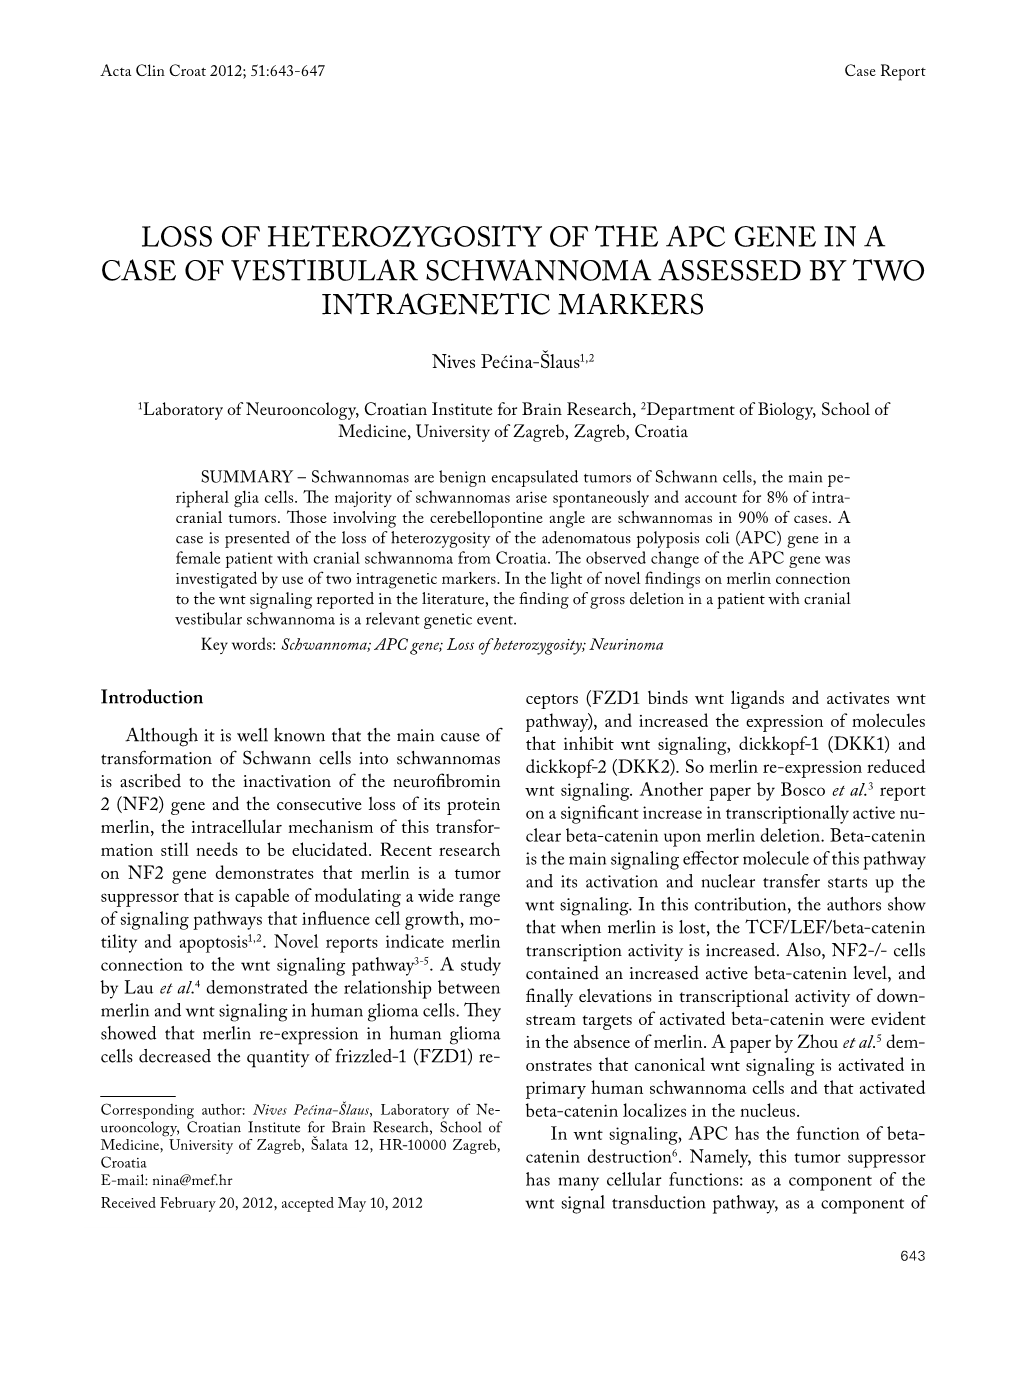 Loss of Heterozygosity of the APC Gene in a Case of Vestibular Schwannoma Assessed by Two Intragenetic Markers